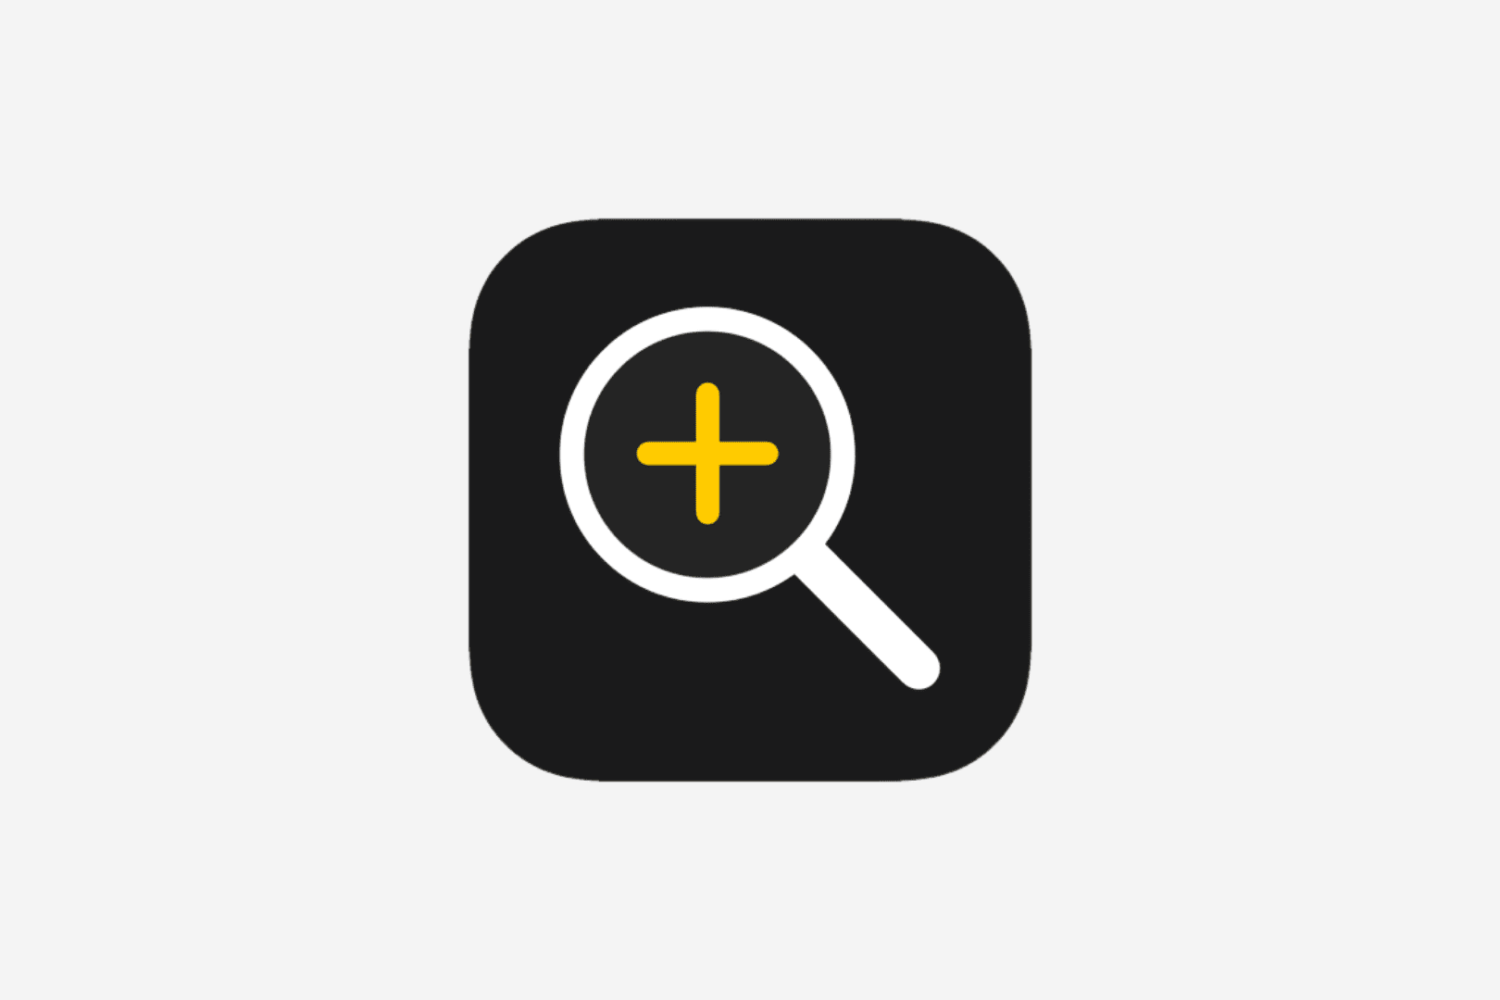 iPhone Magnifier app icon